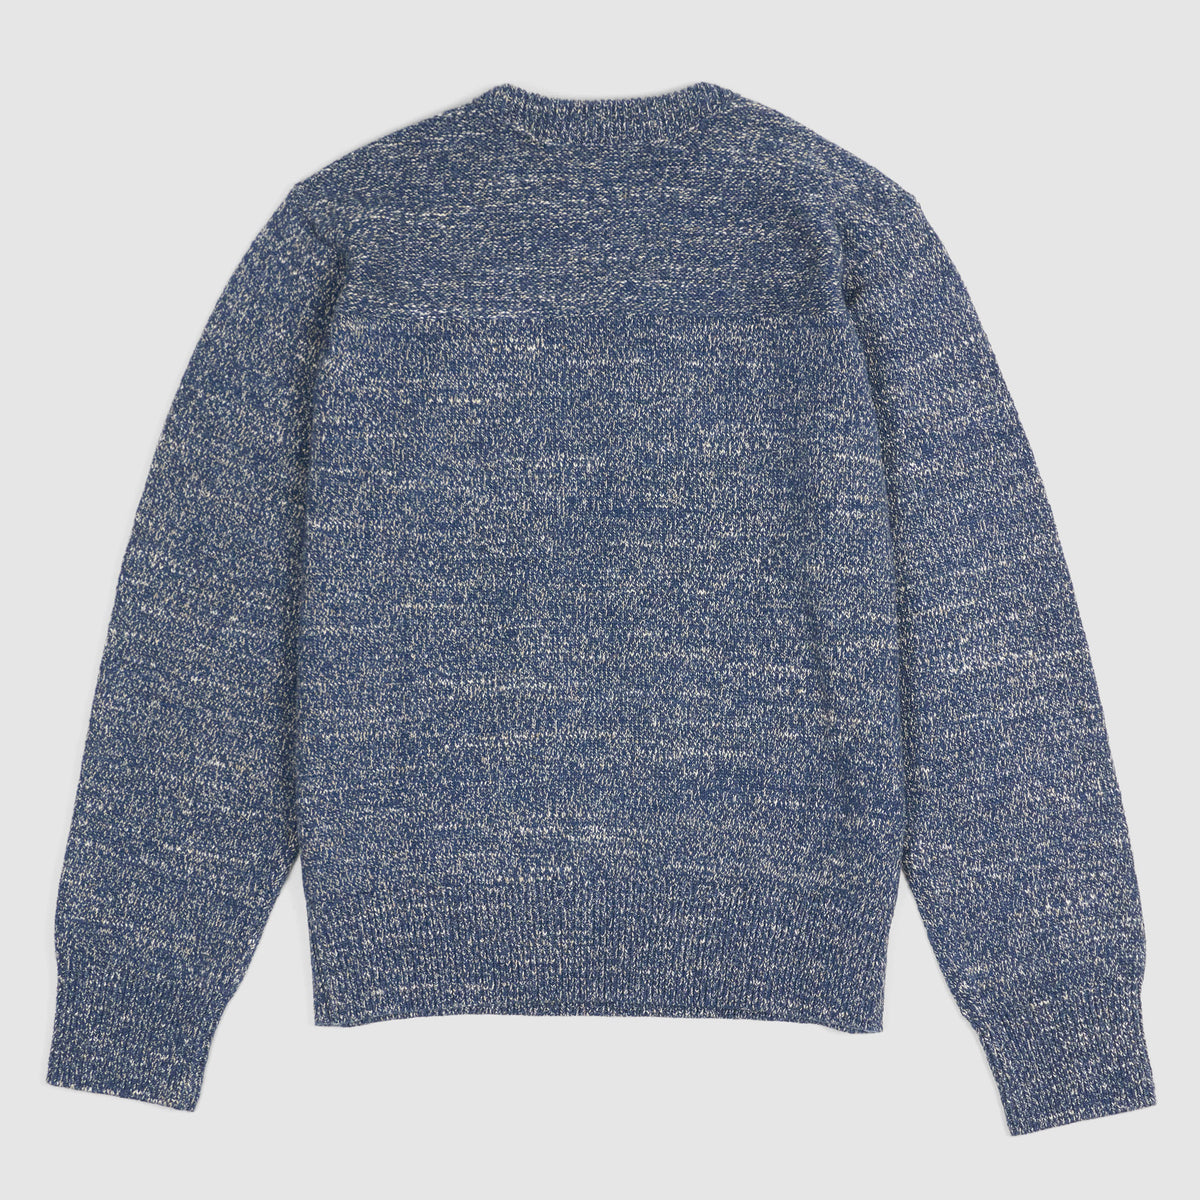 Double RL Knitted Crew Neck Cotton Sweater